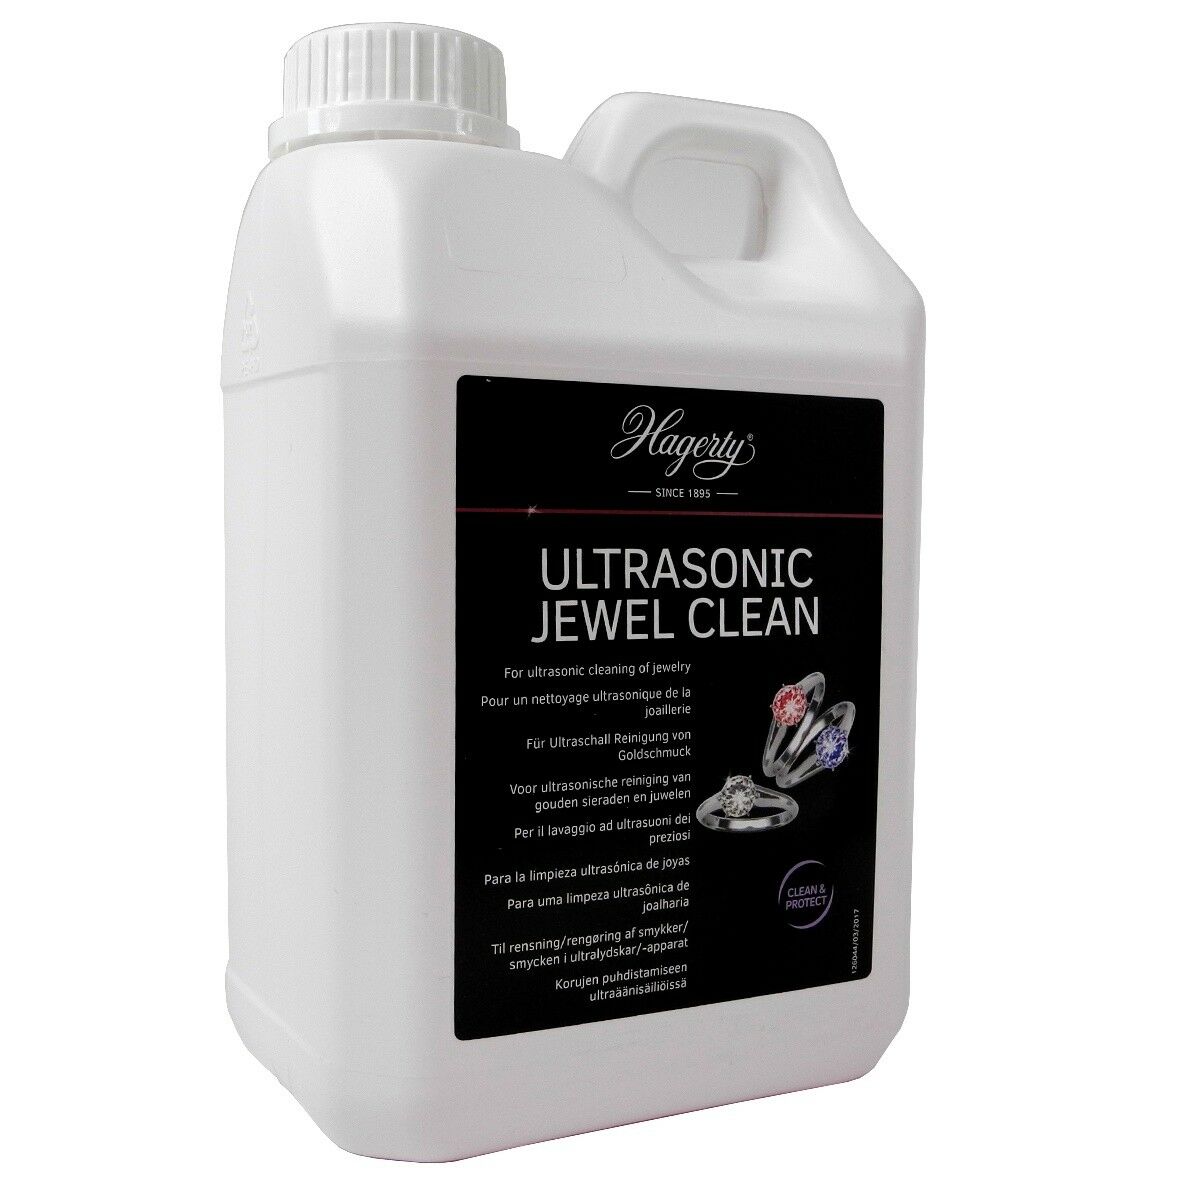 Ultrasonic Jewel clean product by Hagerty